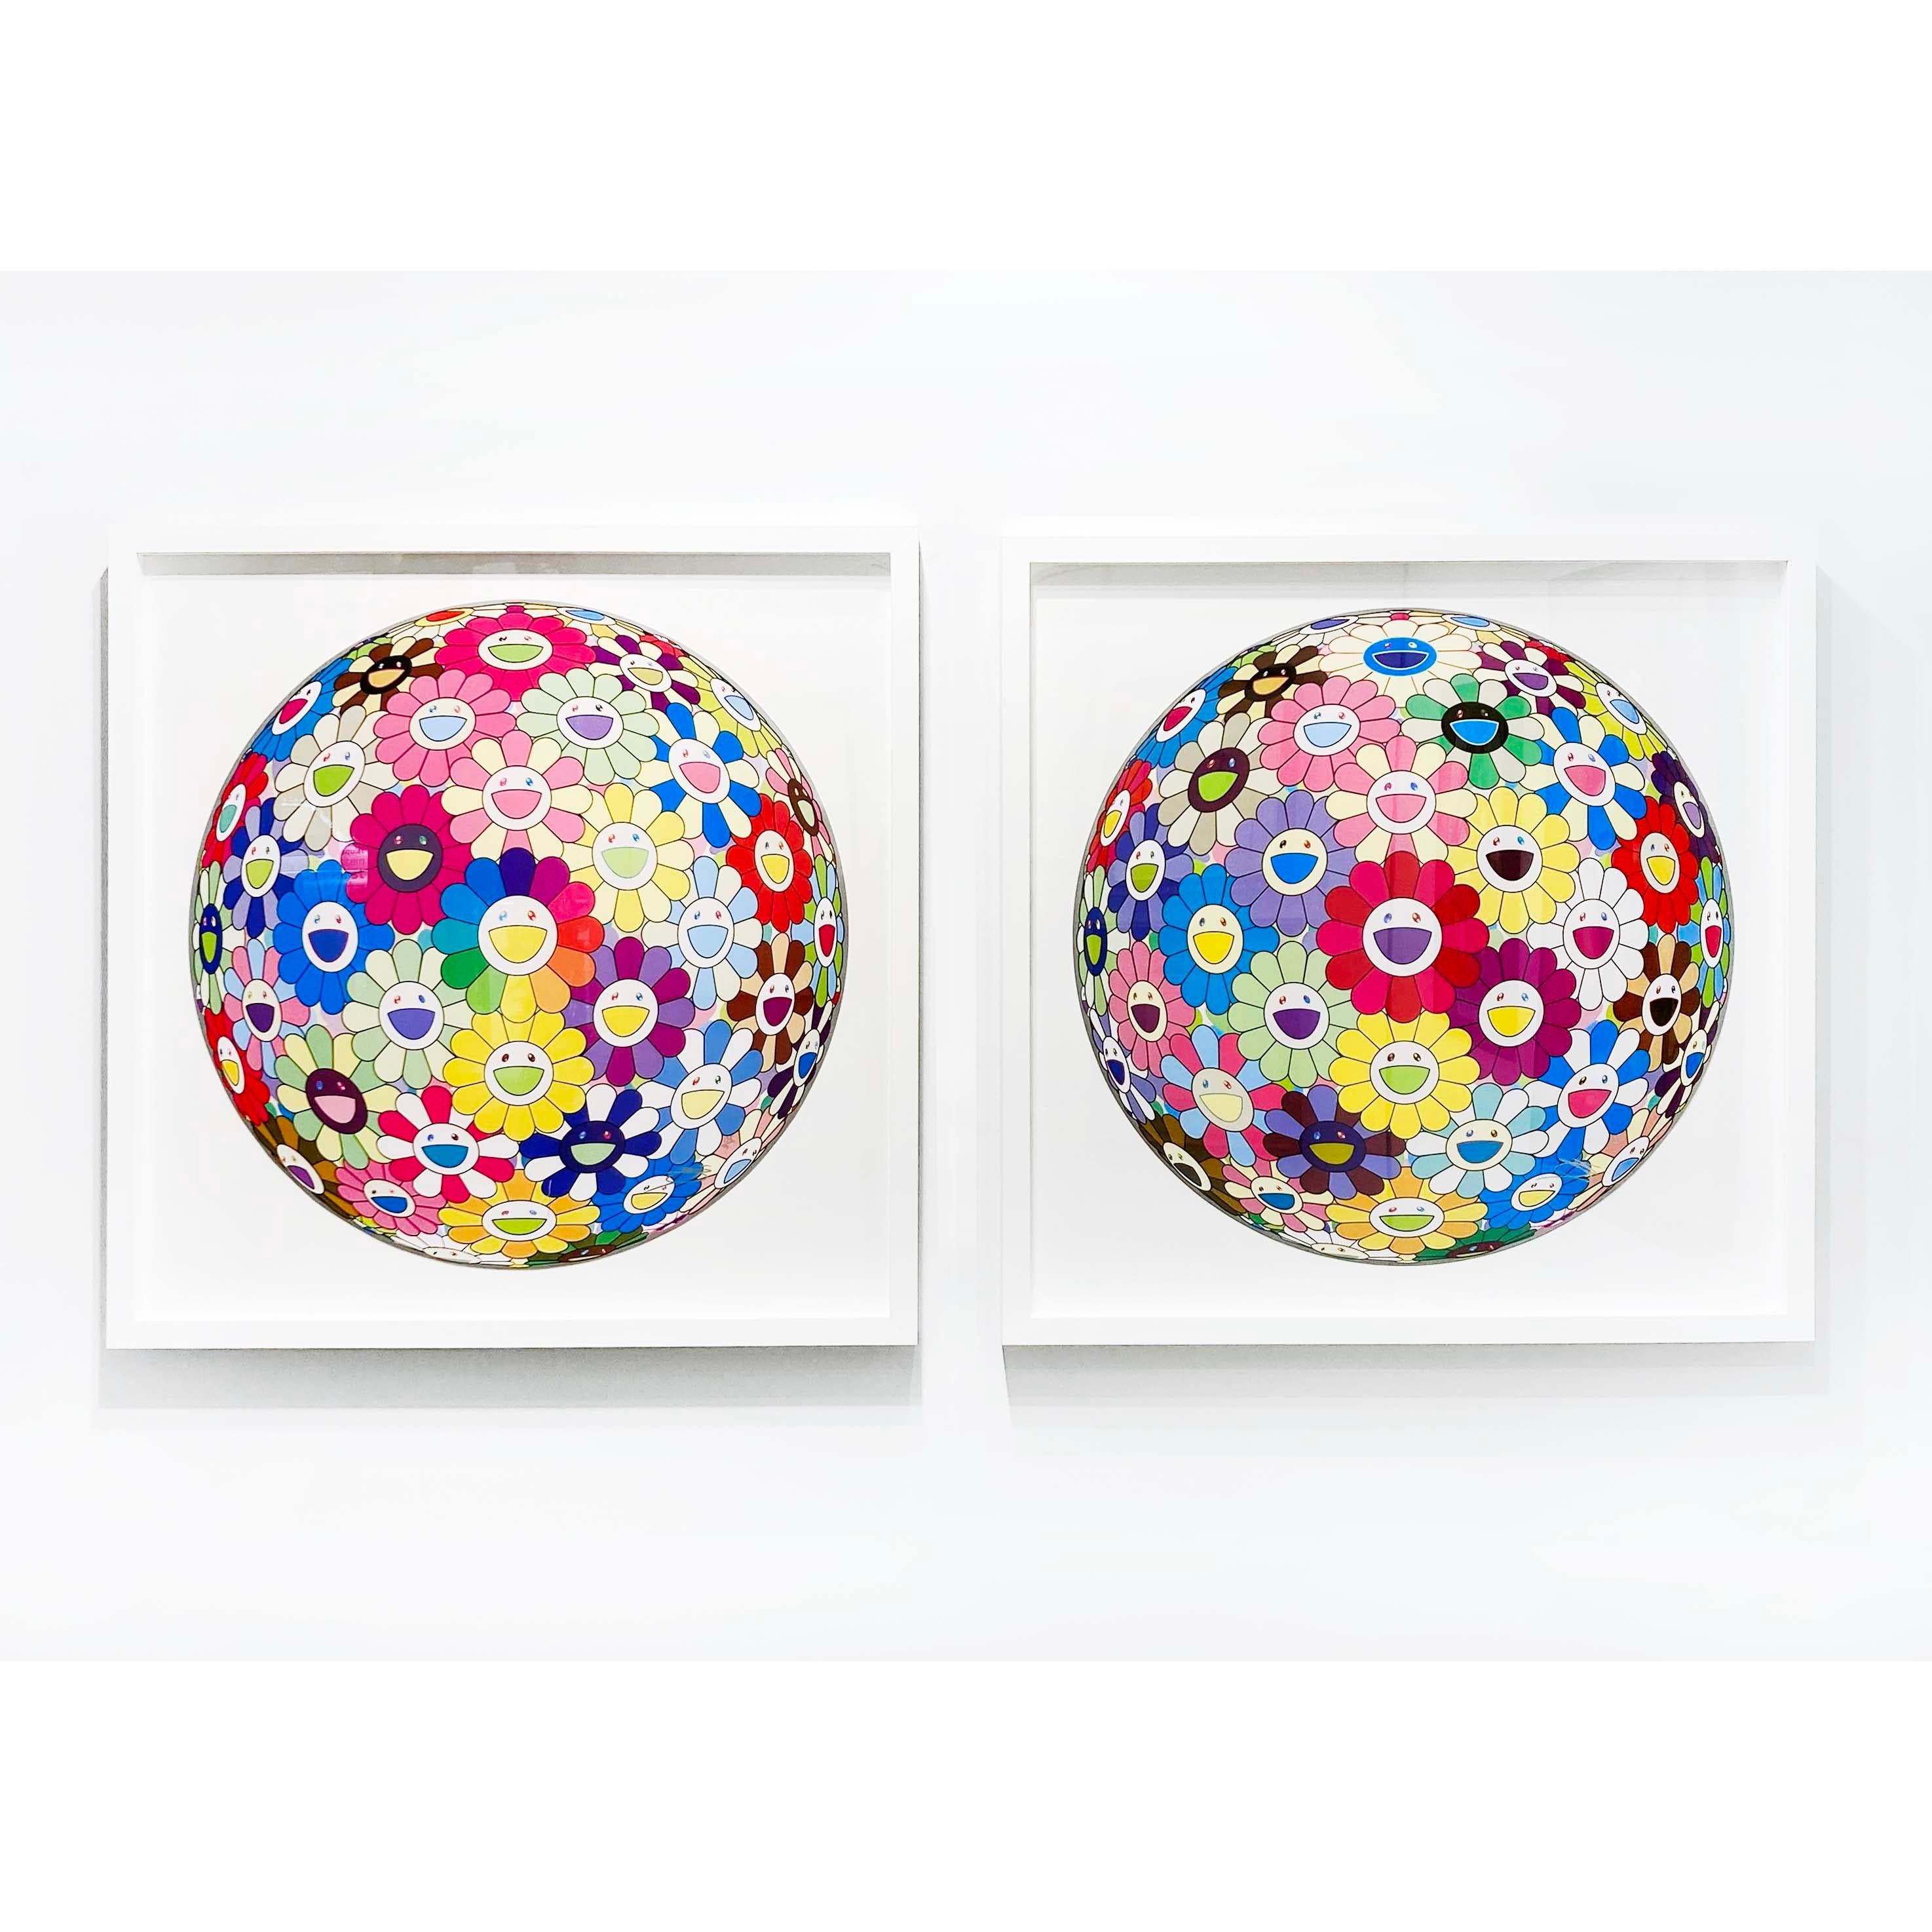 Artist:  Murakami, Takashi
Title:  Flowerball: Colorful, Miracle, Sparkle 
Date:  2022
Medium:  Offset Lithograph in colors on smooth wove paper
Unframed Dimensions:  28